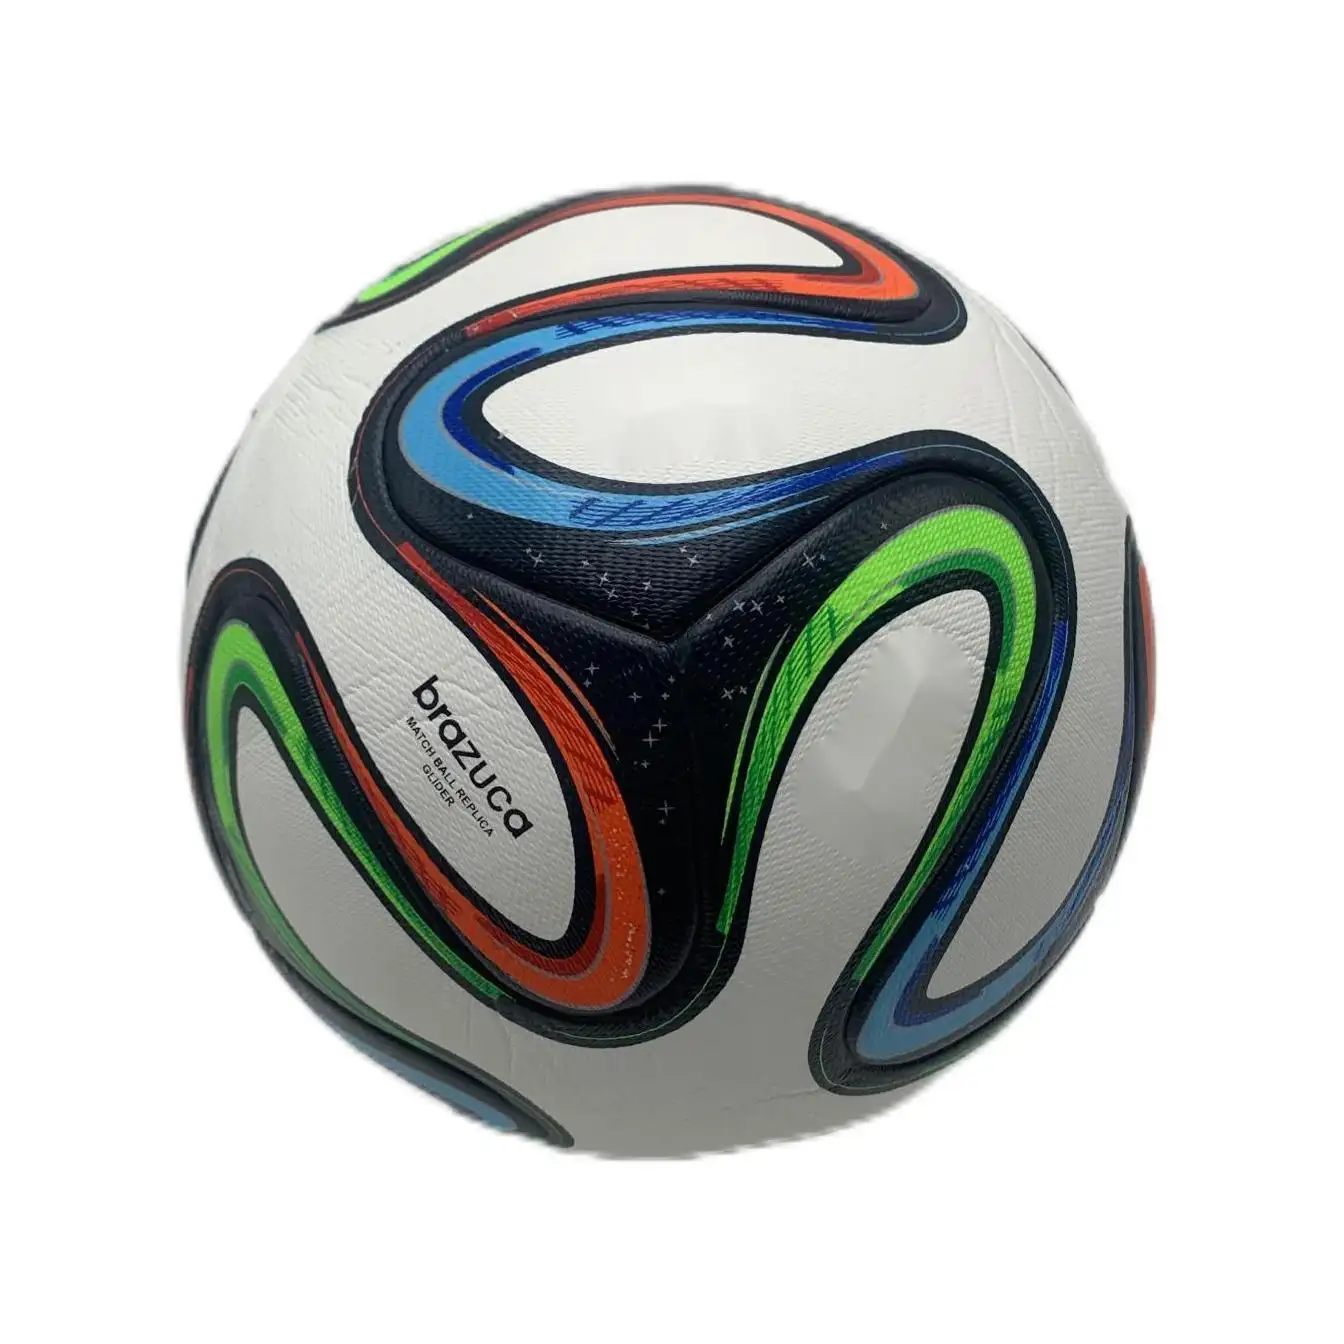 Brazil 2014 Official Football Match High-end Seamless Leather Football 5 Size Customised Logo BRAZUCA